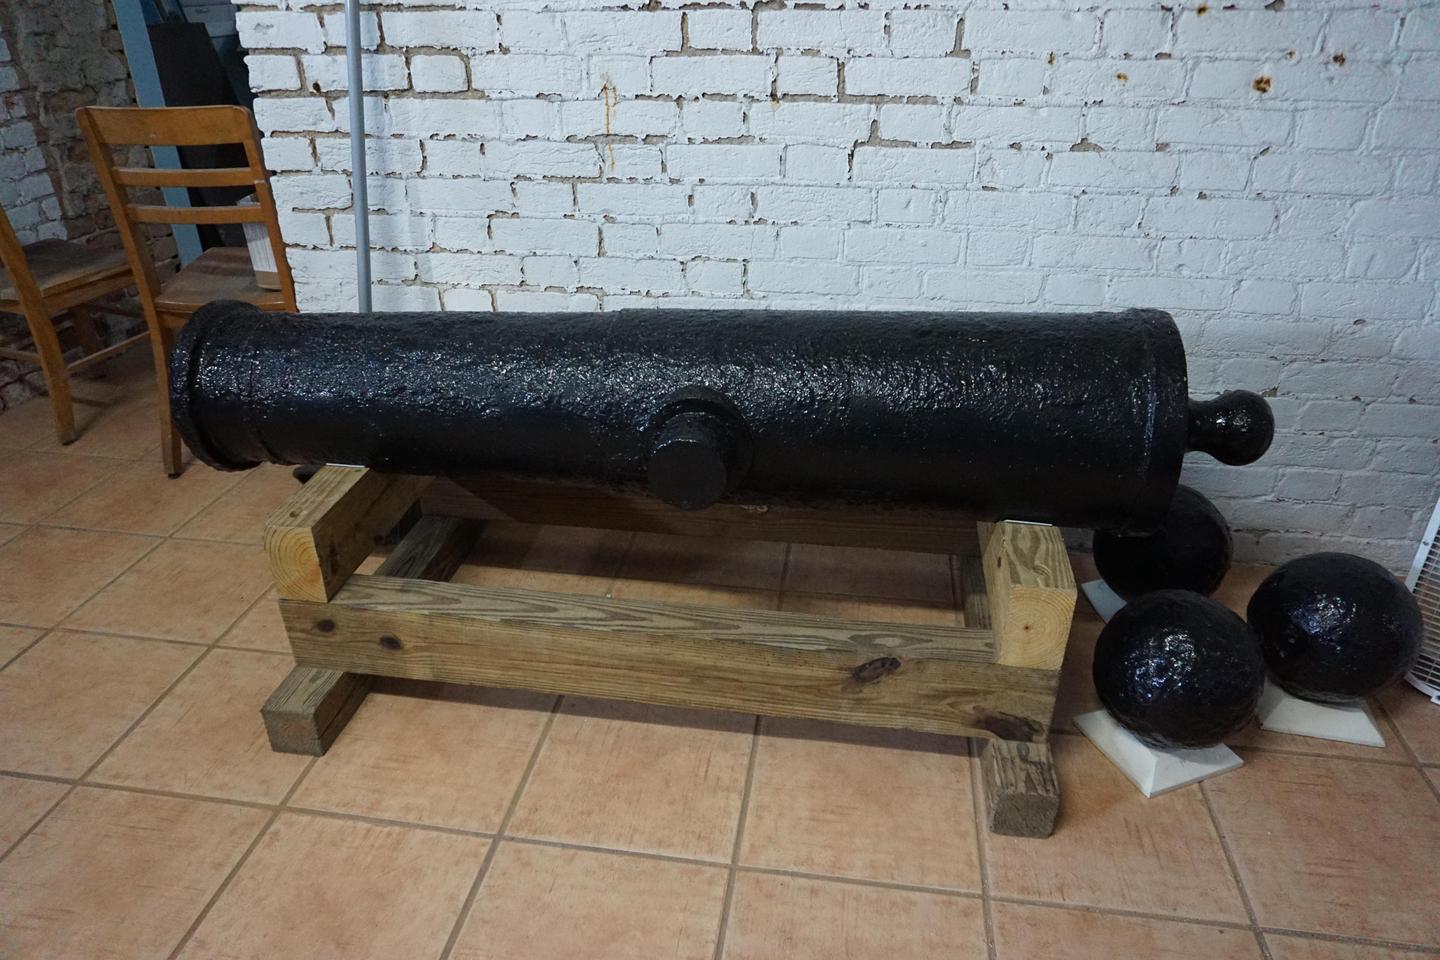 Dry Tortugas Visitor Center Cannon DisplayA preserved cannon on display at the Garden Key Visitor Center